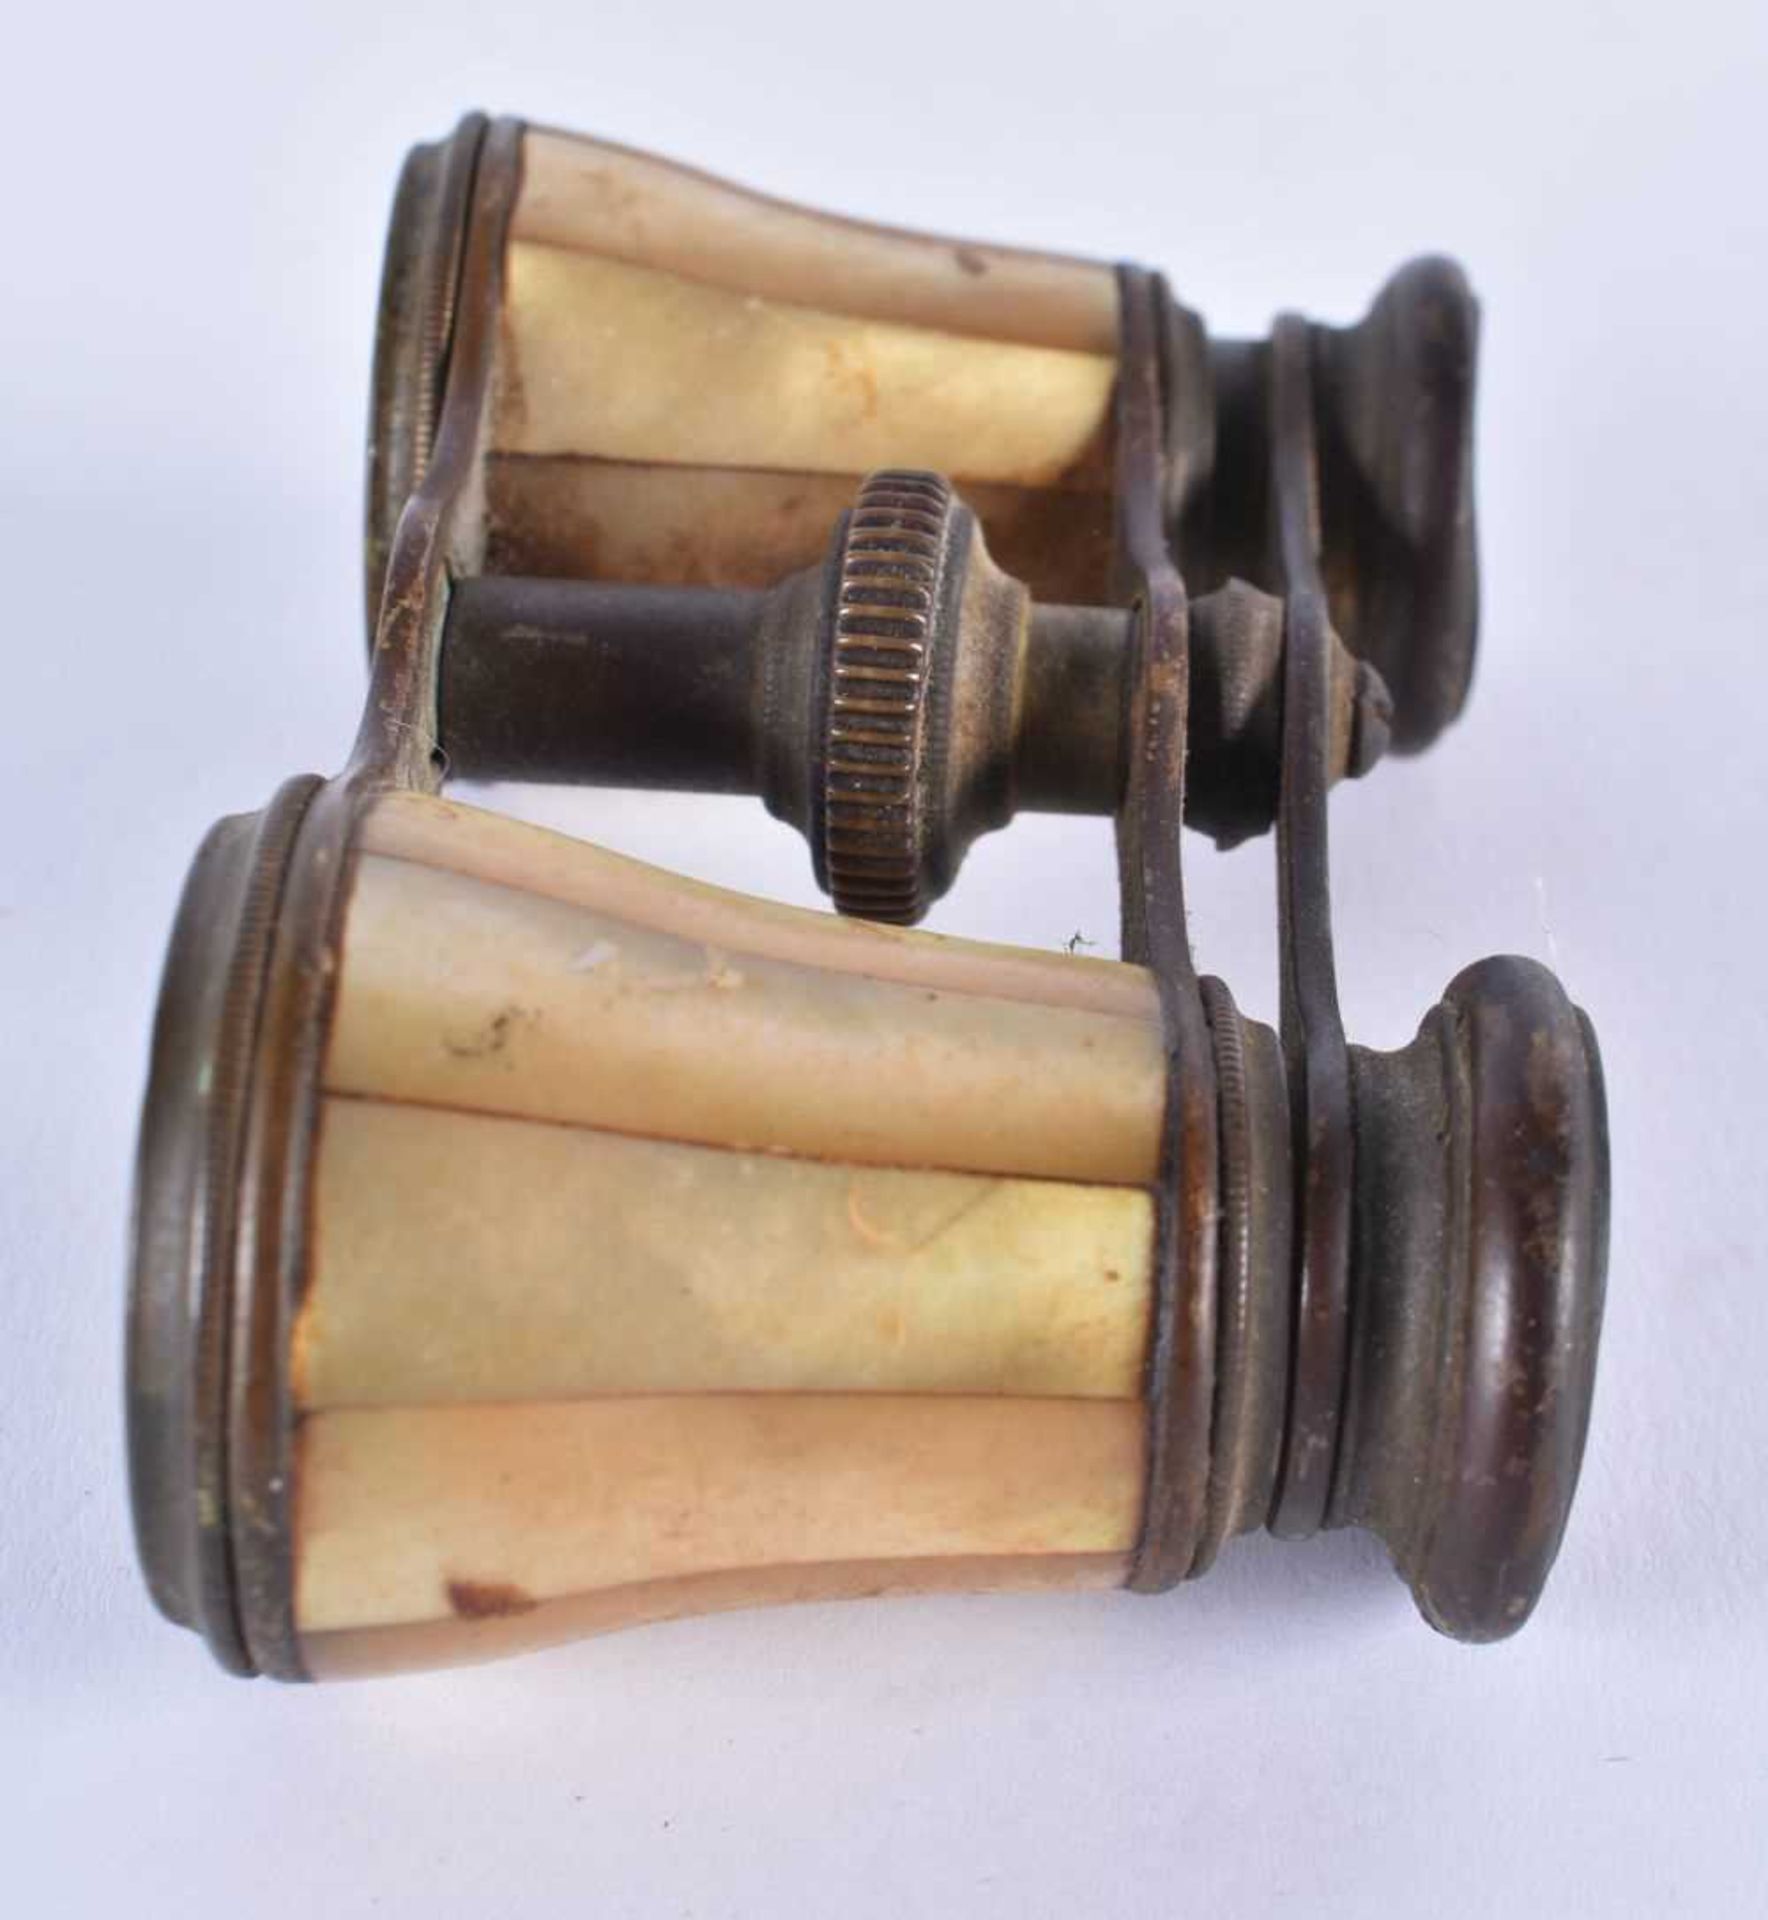 A PAIR OF MOTHER OF PEARL OPERA GLASSES. 9 cm x 8 cm extended. - Image 4 of 4